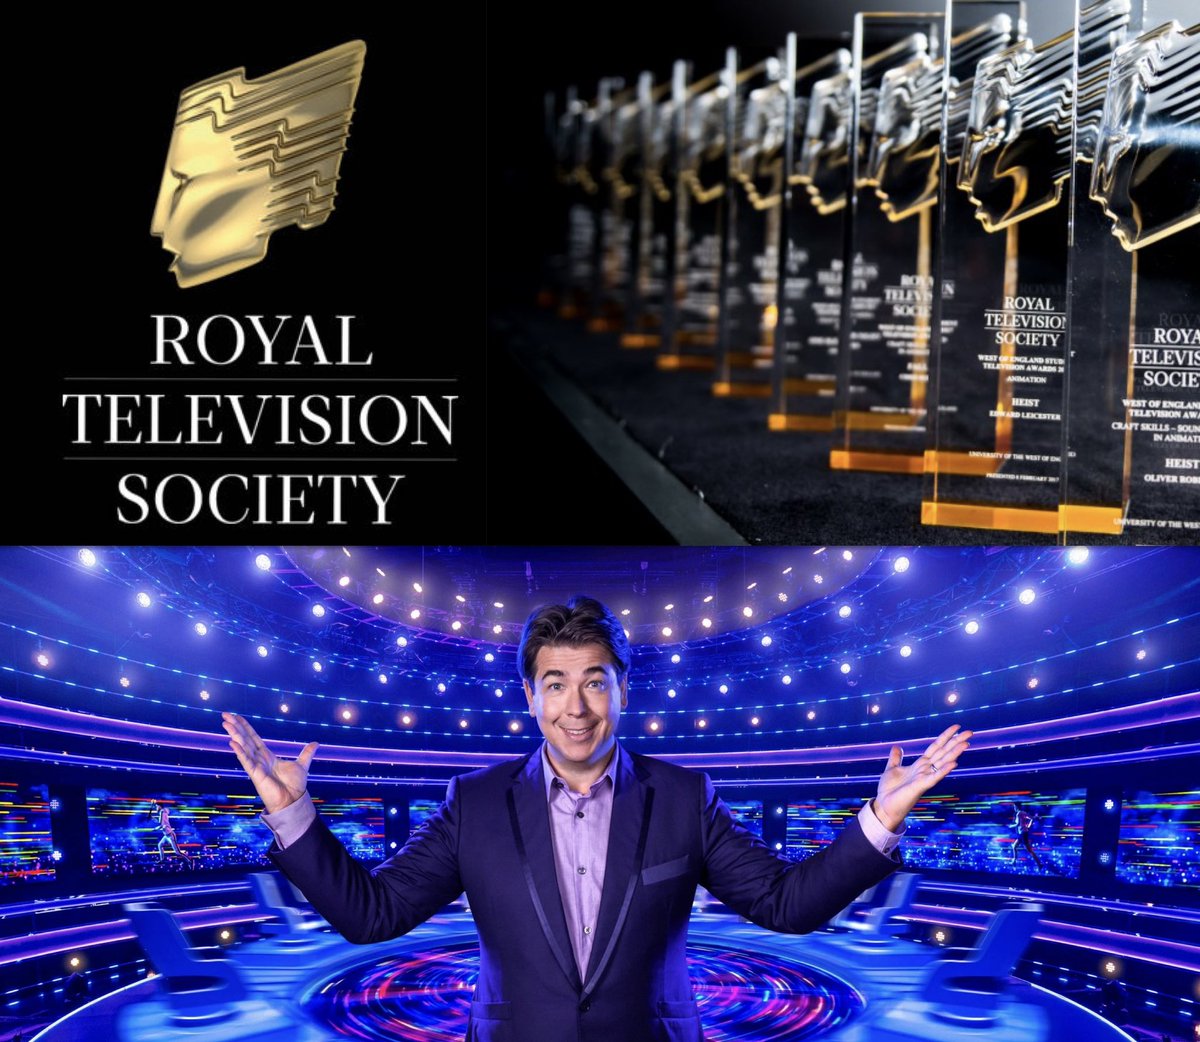 Honoured to have been nominated for a #royaltelevisionsociety award for my music to @bbcone’s #thewheel. Currently working with @McInTweet and the @HungryBearMedia production team in LA on the @nbc version coming soon.